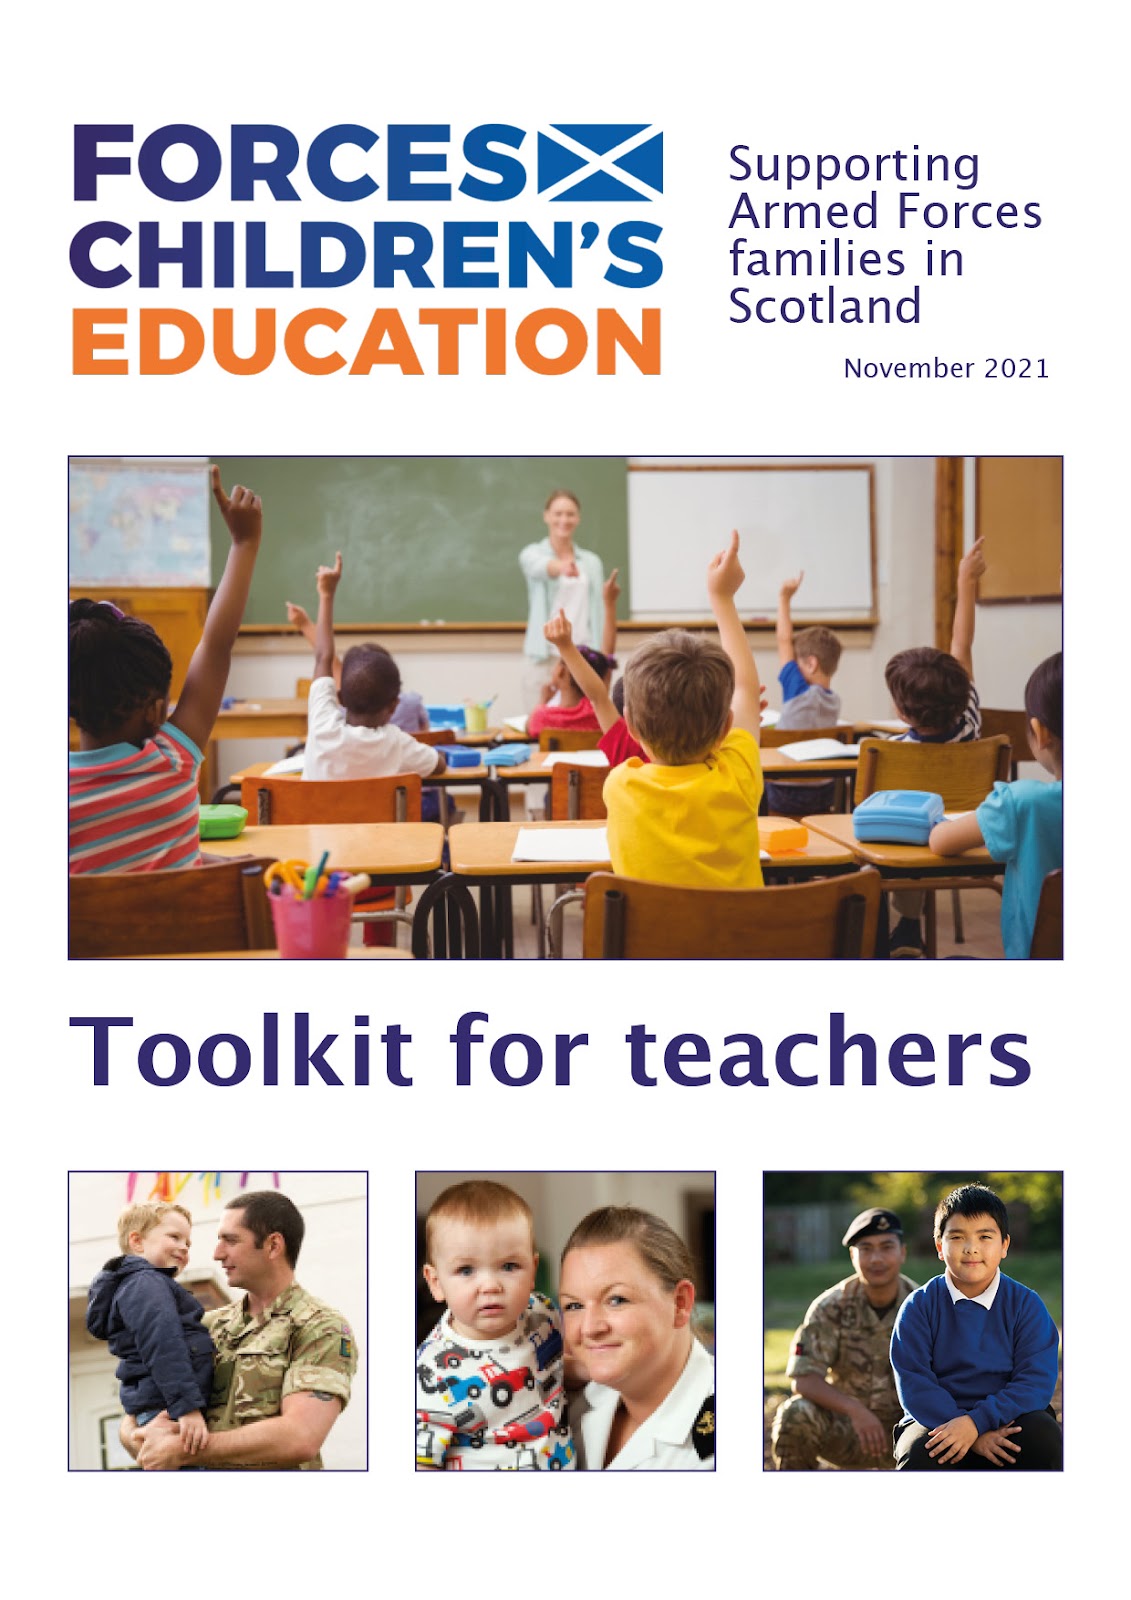 The cover of Forces Children's Education's new Toolkit for teachers document